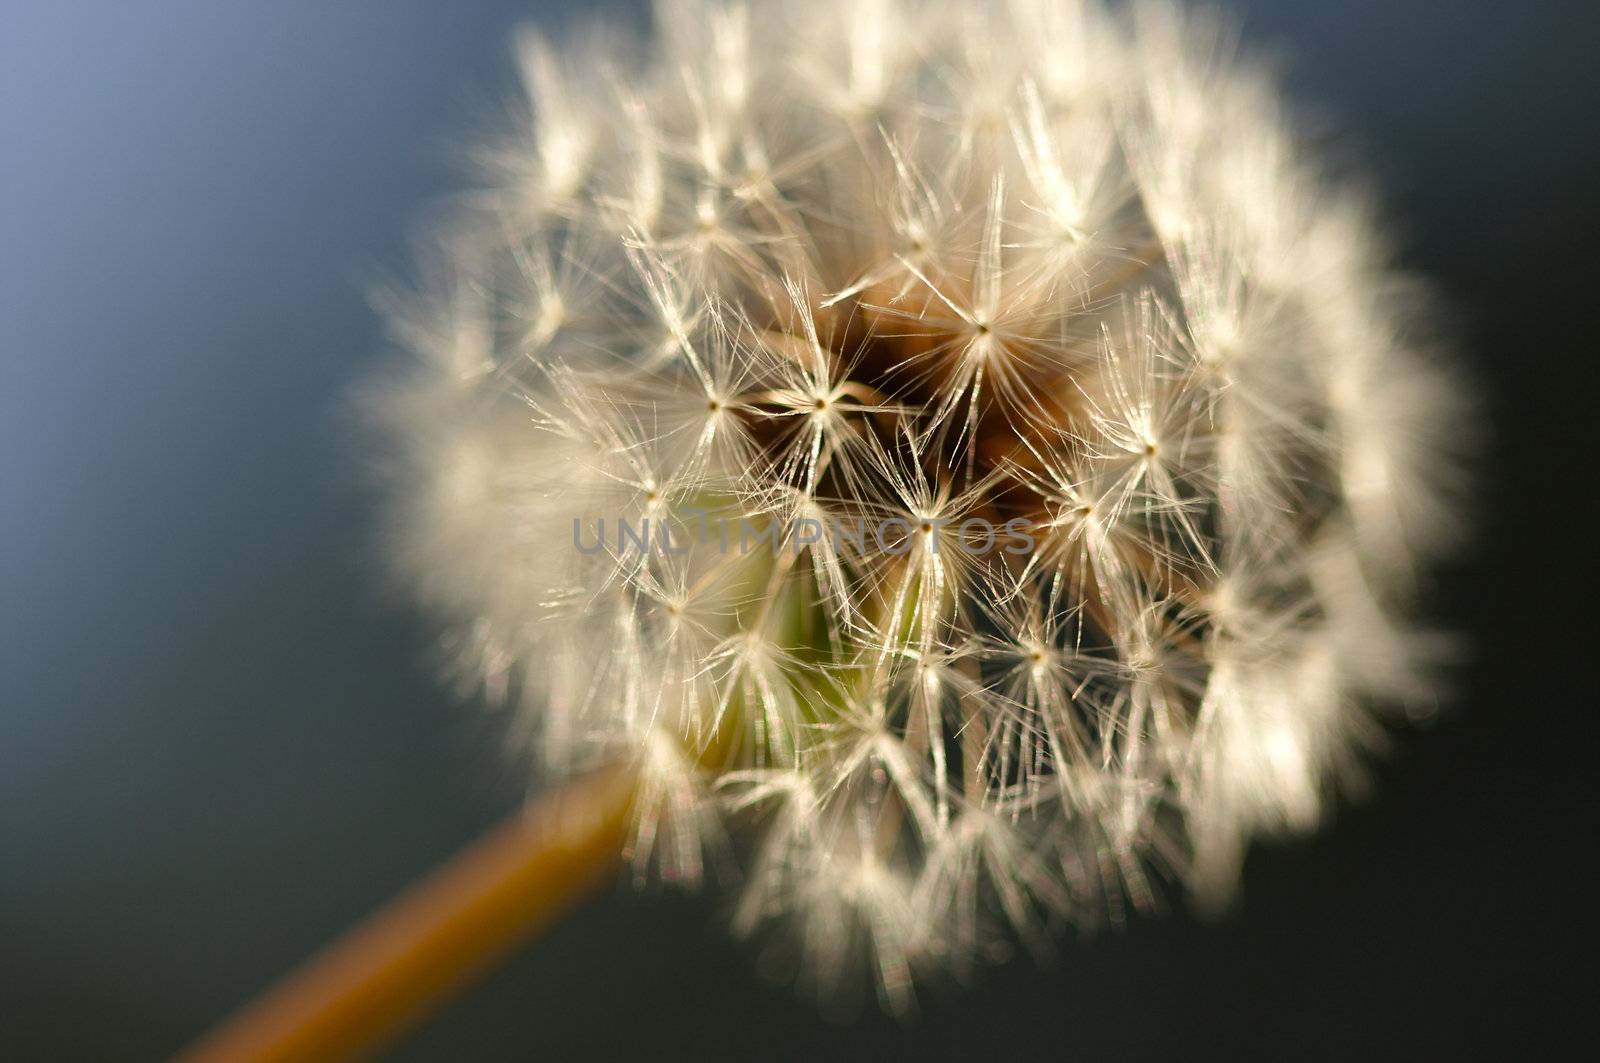 Dandelion Macro Shot by Feverpitched